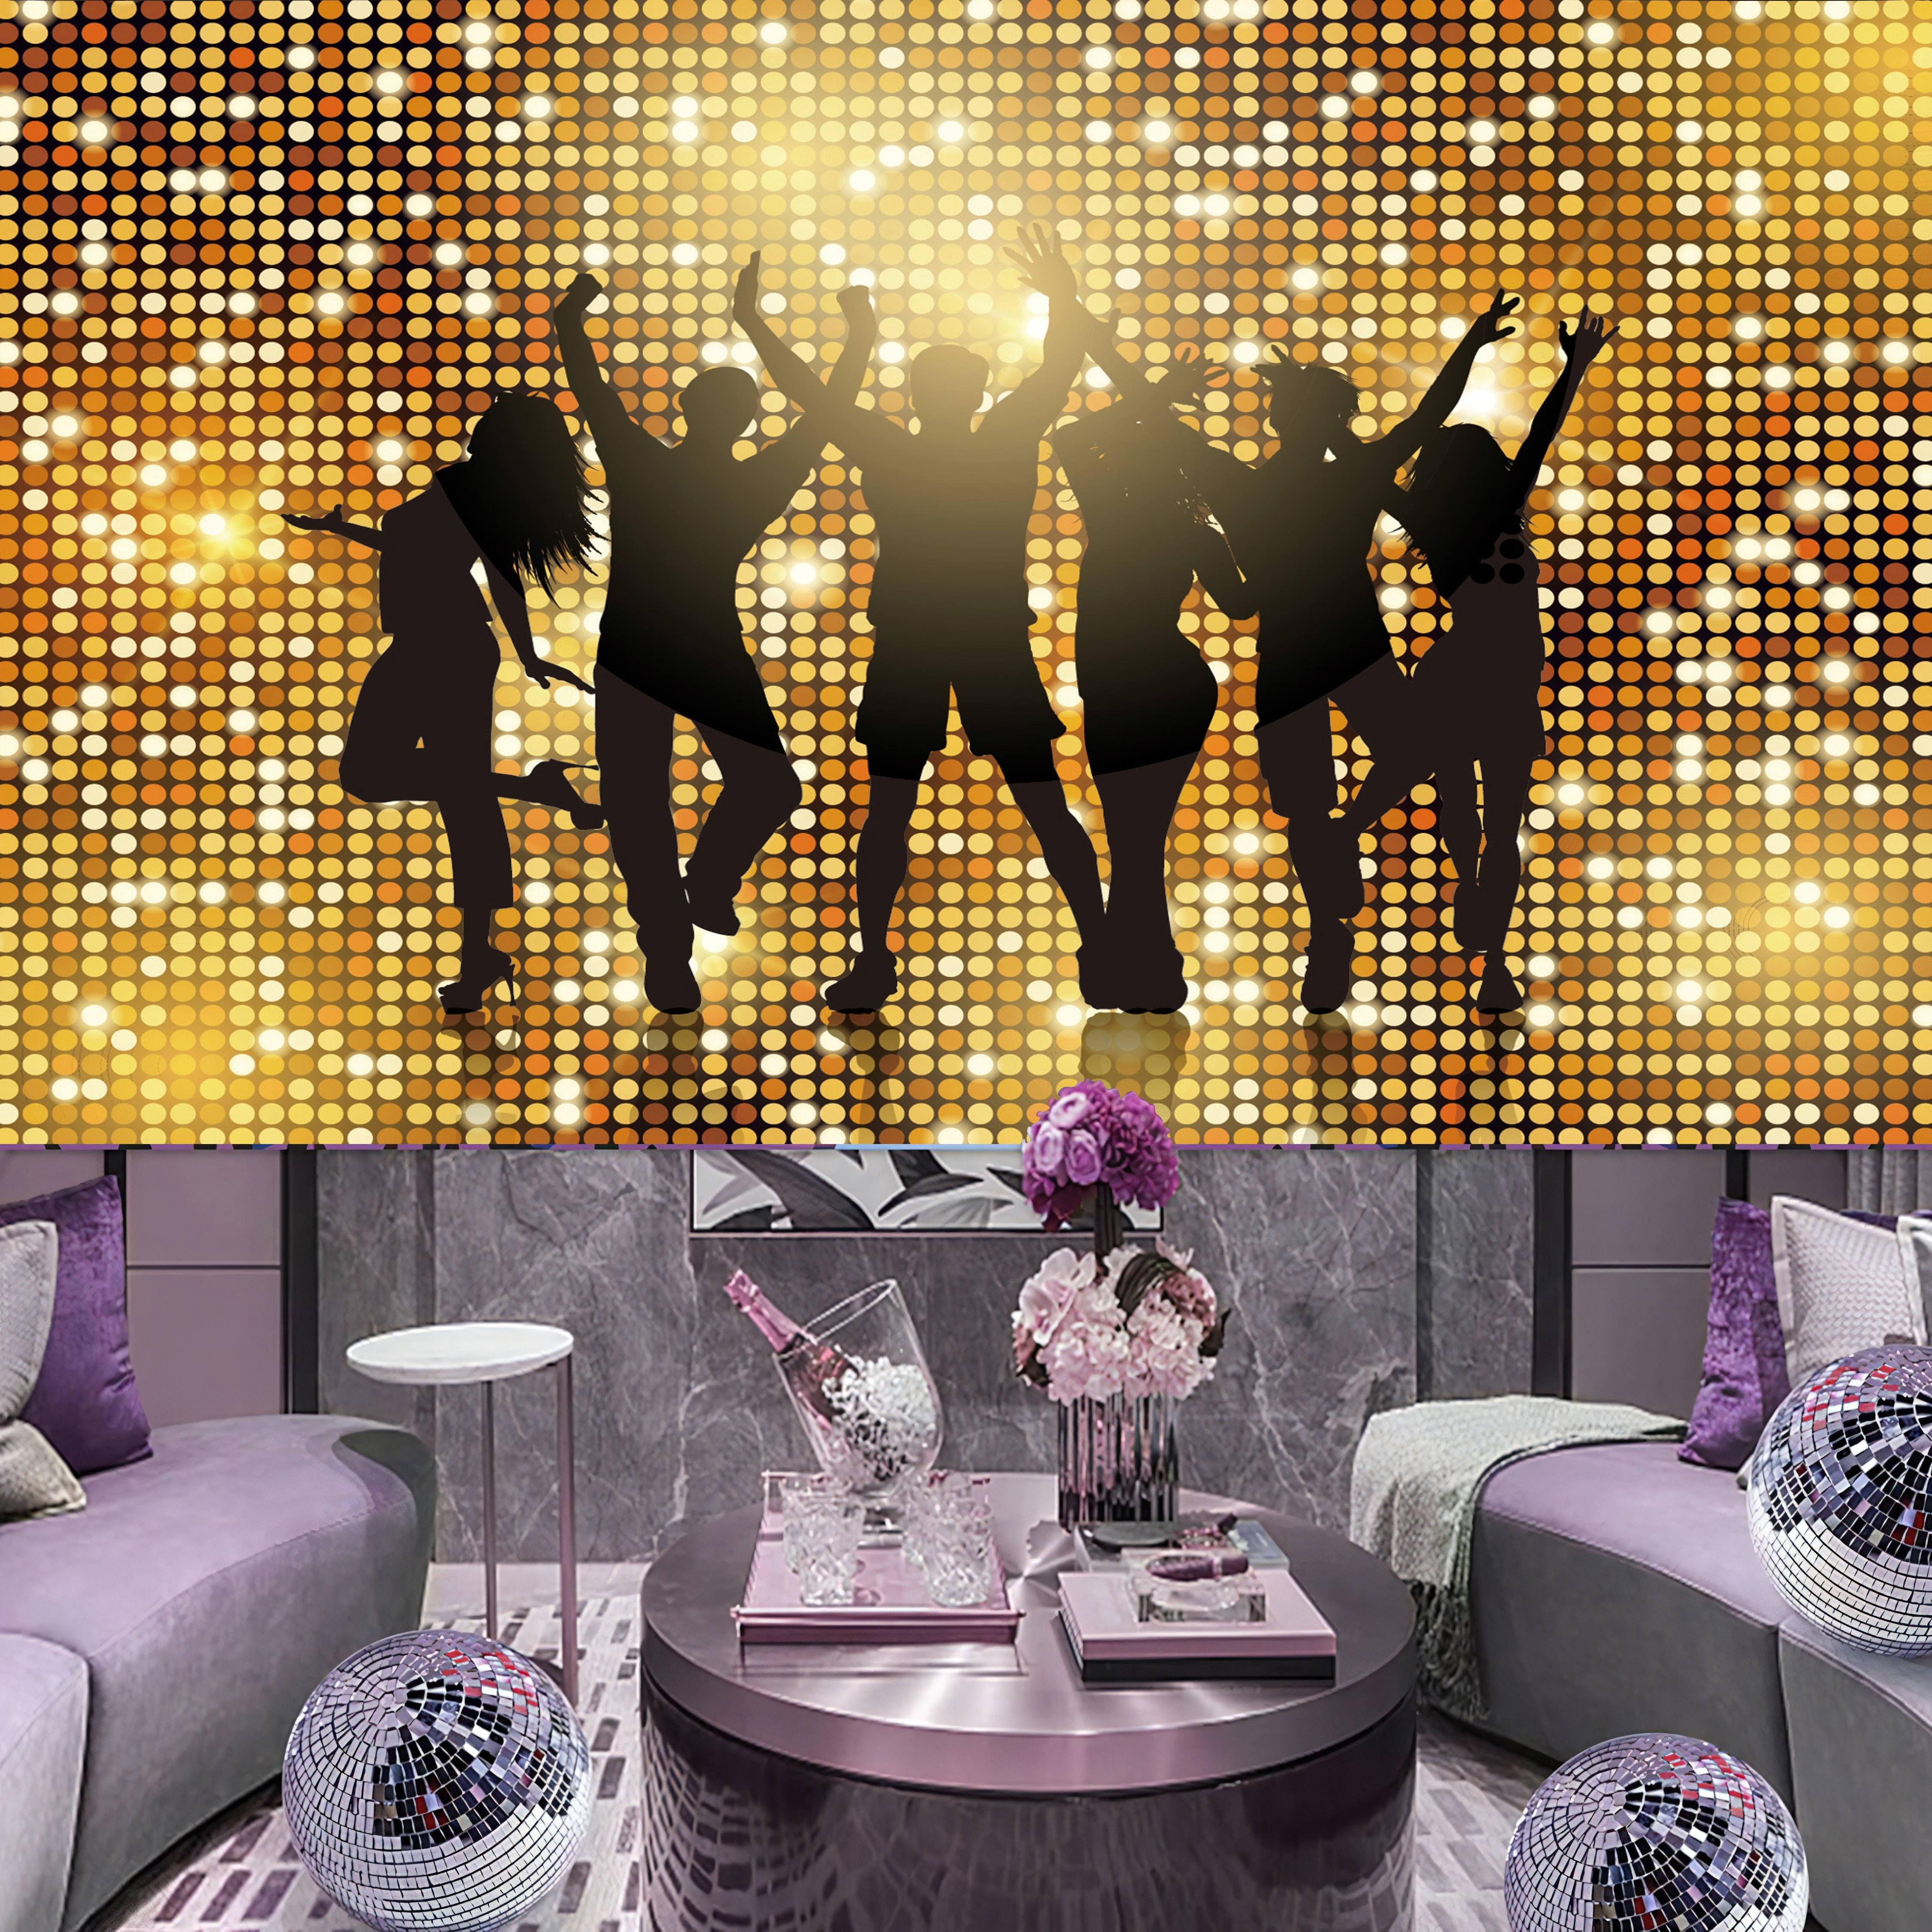 4 Dance Party Backgrounds Set  Party background, Disco party